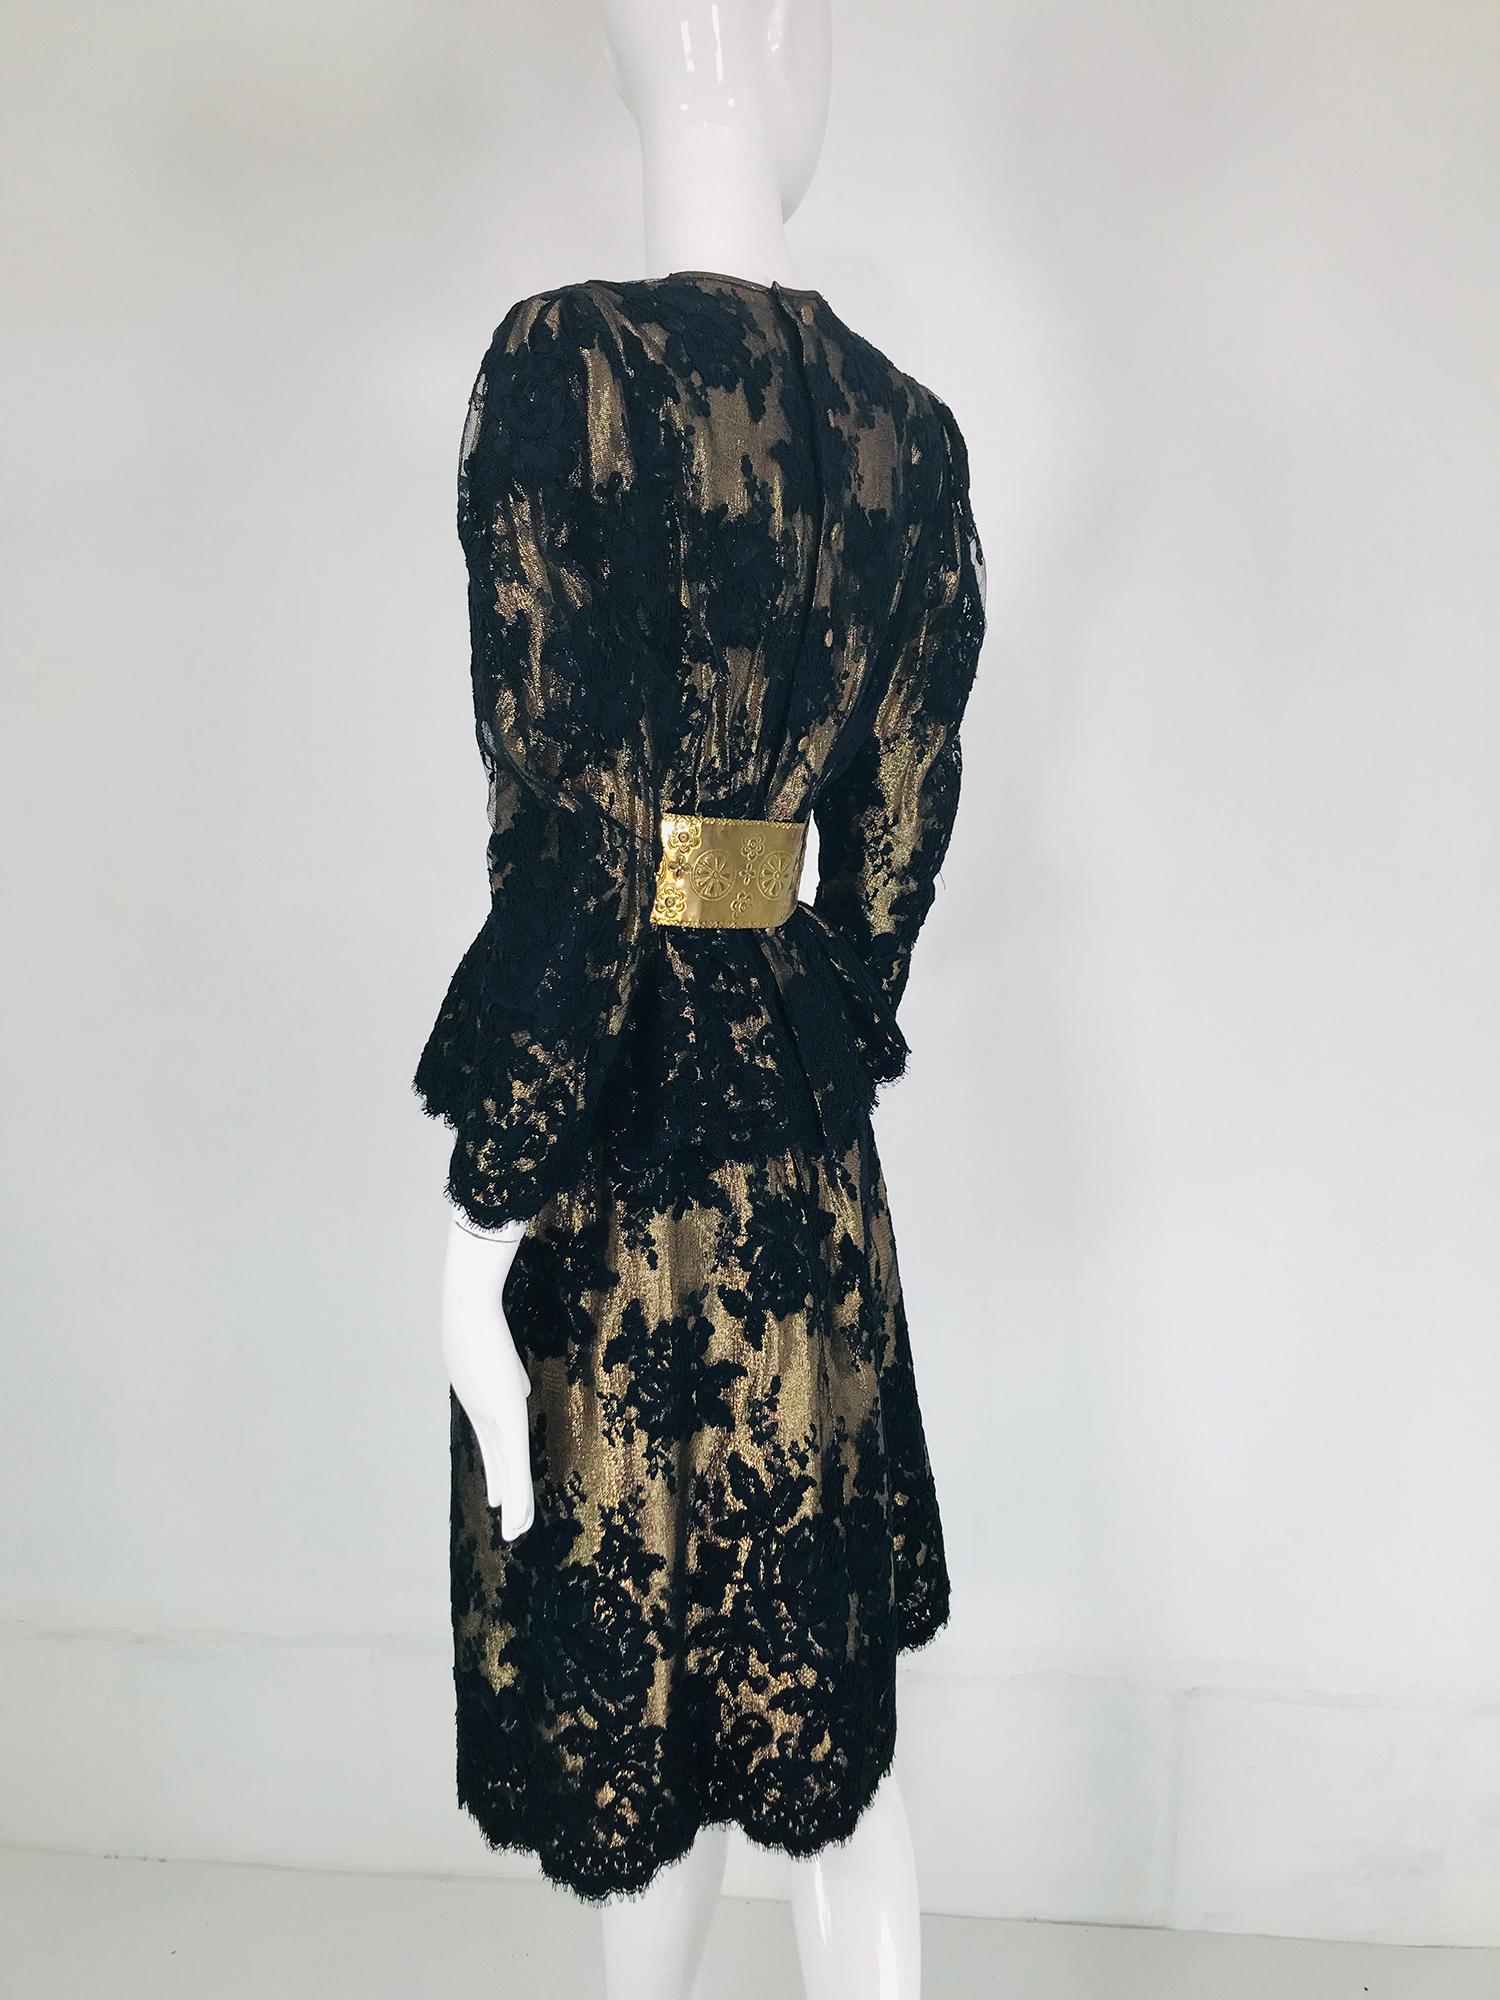 Pauline Trigere Black Guipure Lace over Gold Lame 1980s 2pc Skirt Set  For Sale 3